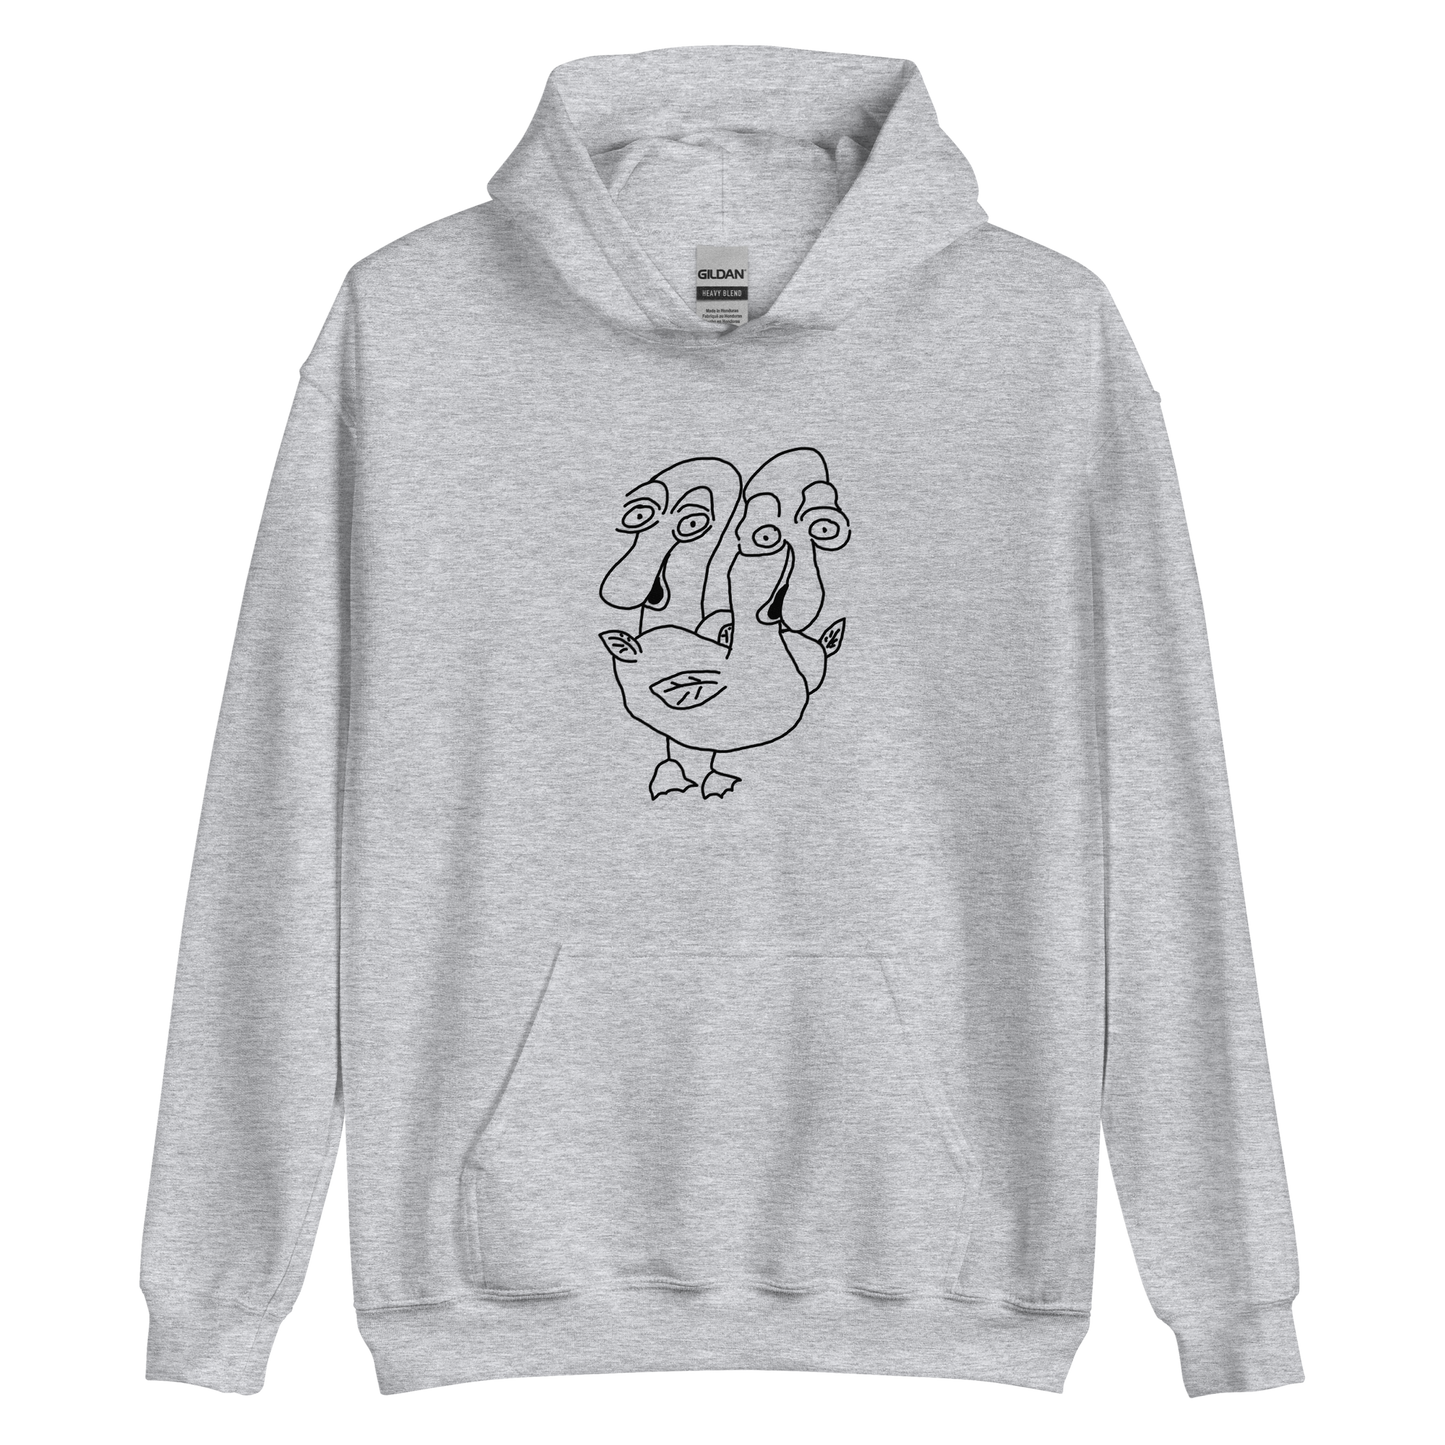 Ducks Fly Together Classic Hoodie